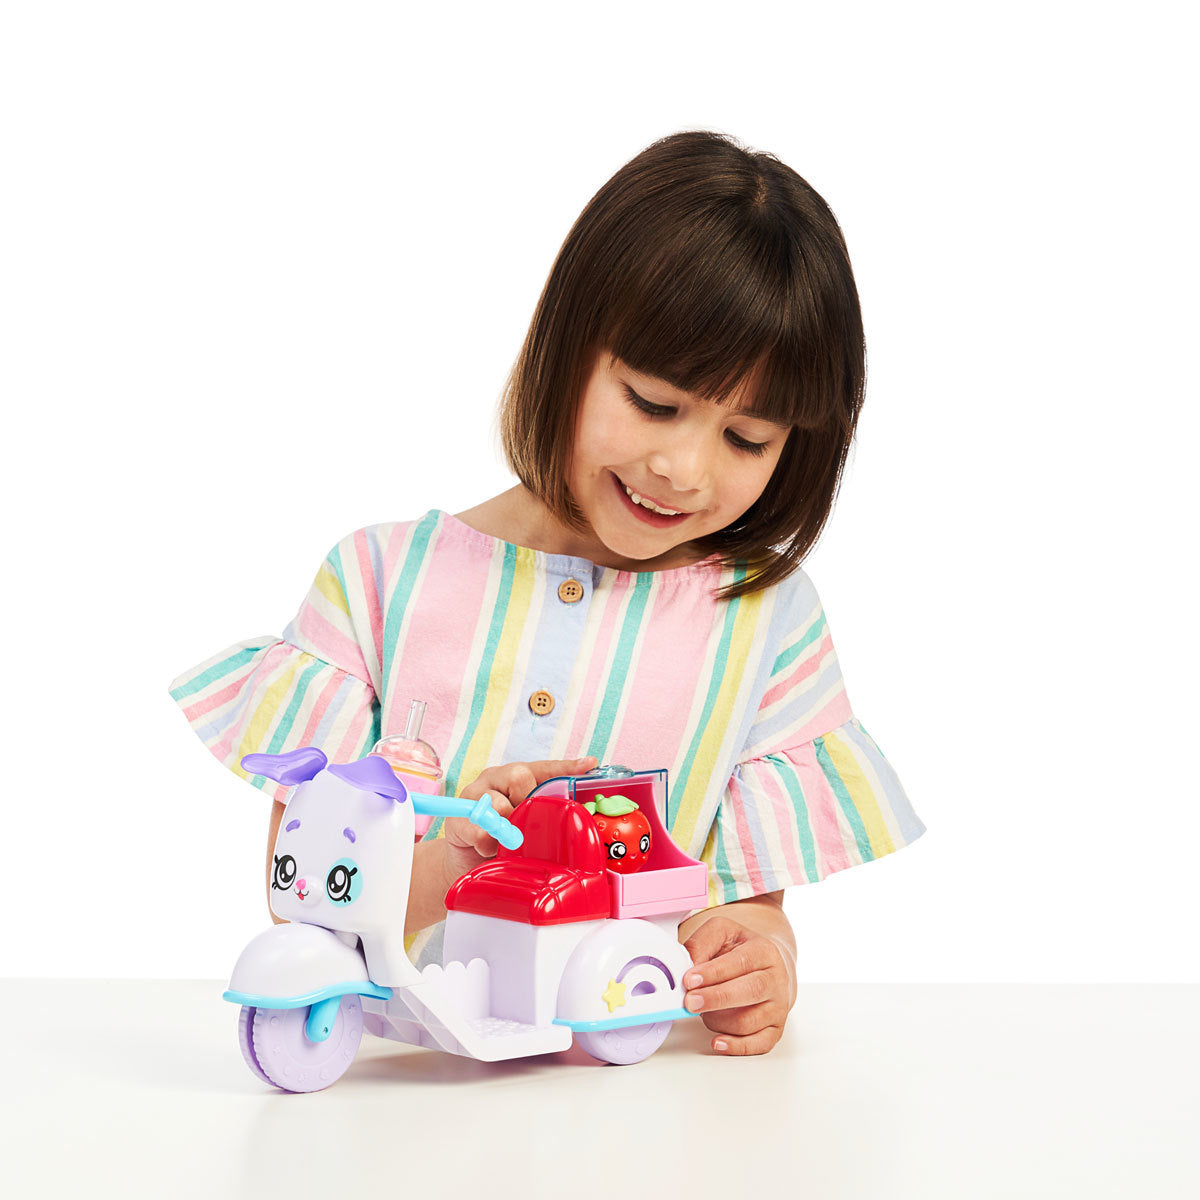 Kindi Kids Puppy Petkin Delivery Scooter and 2 Shopkins